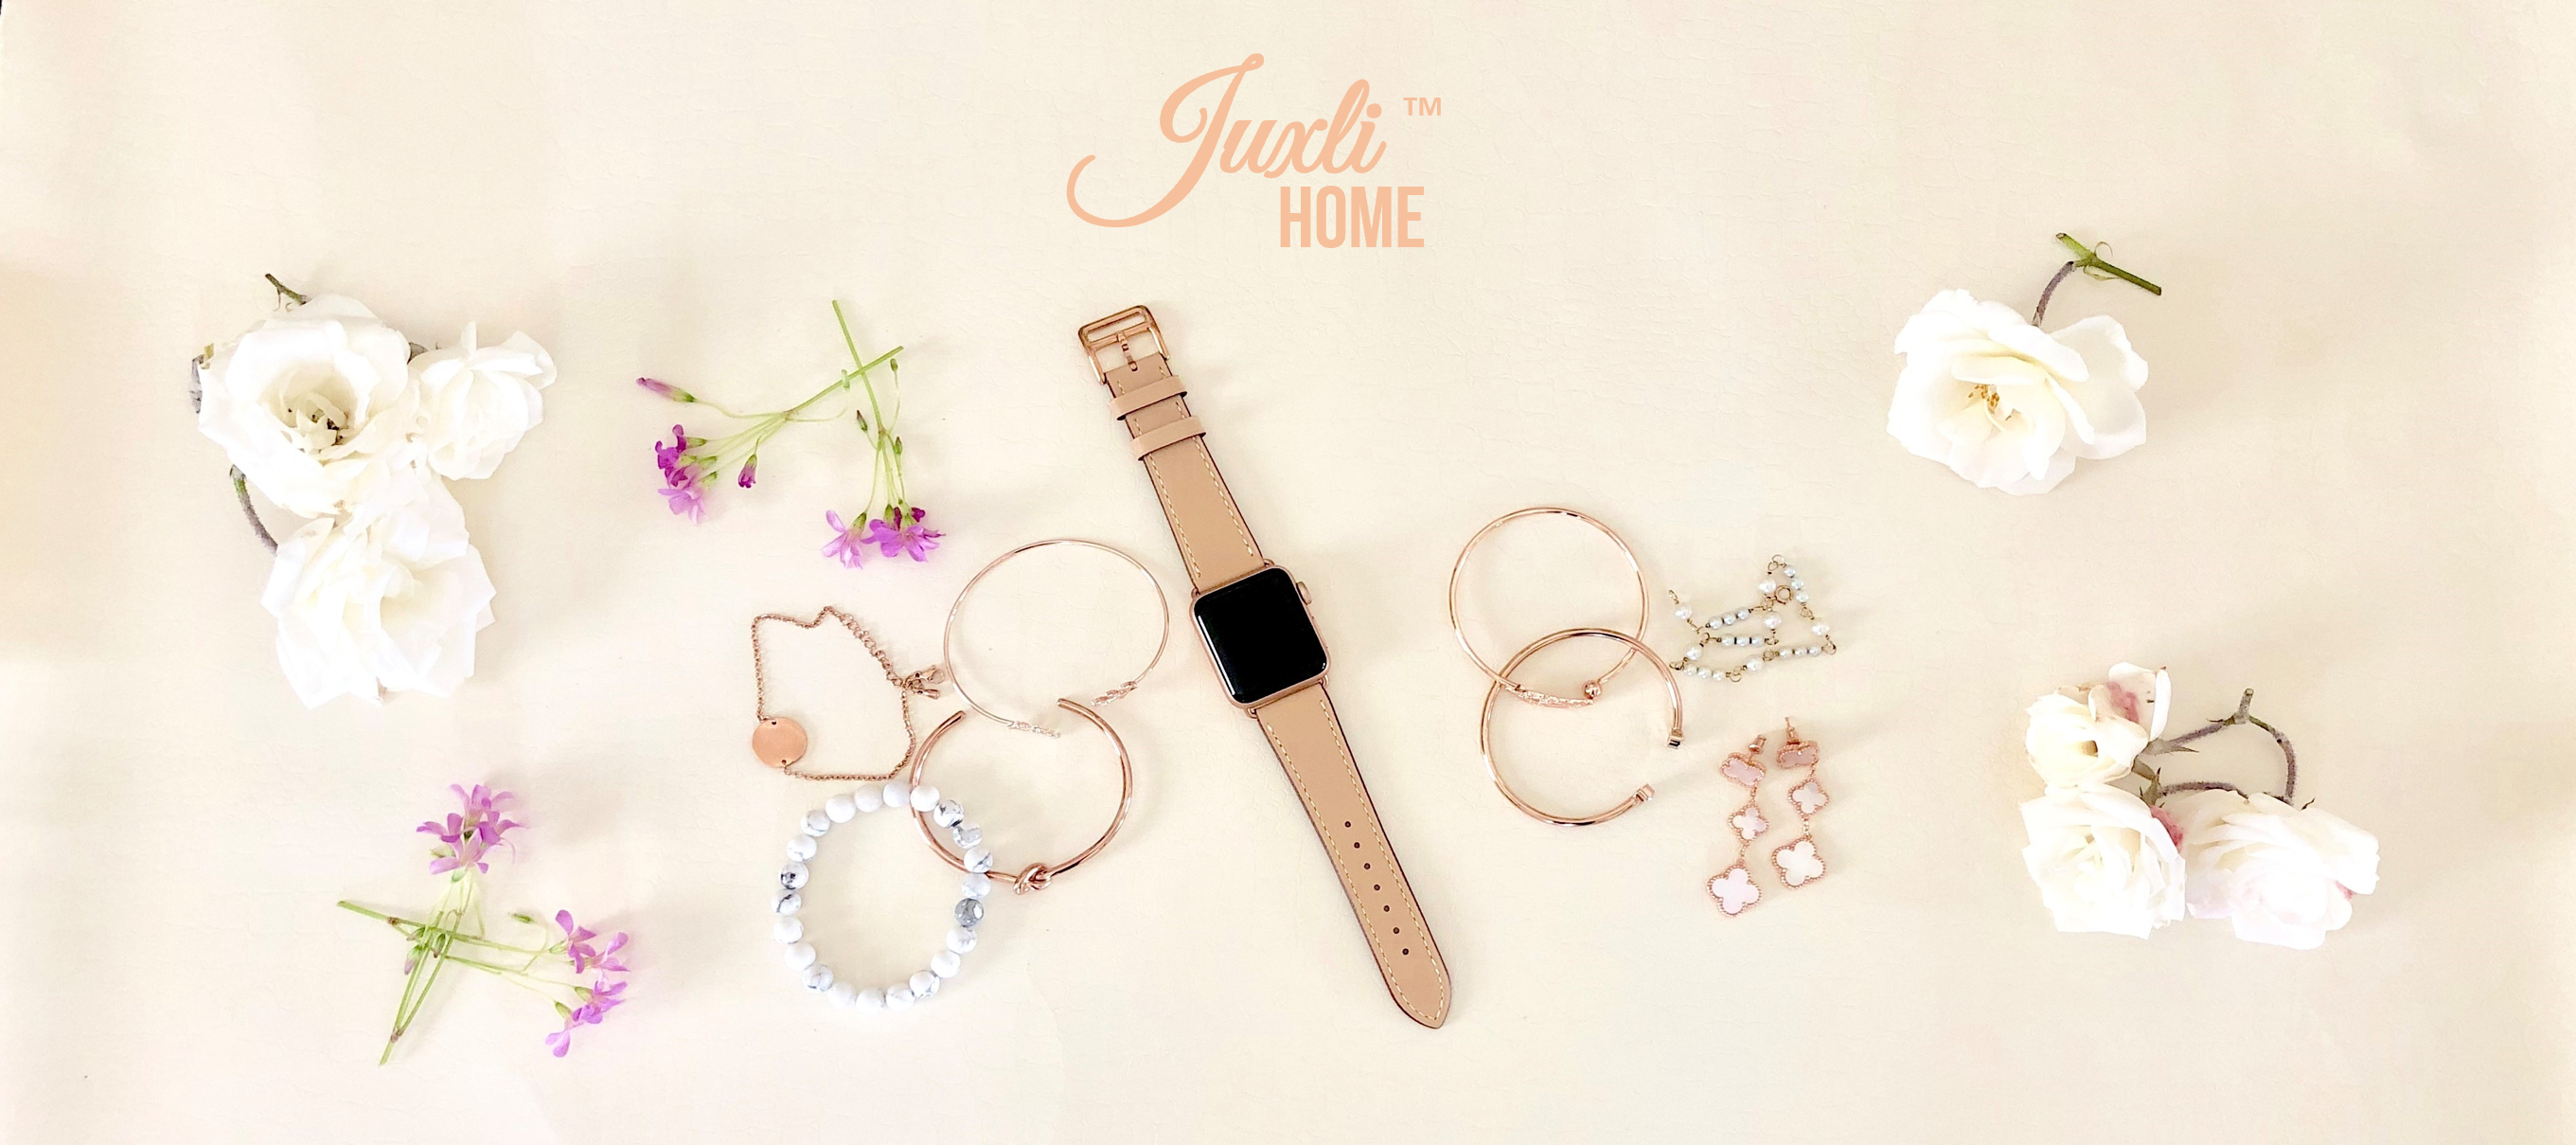 Juxli Home Apple Watch Leather Bands Display of Rose Gold Bracelets to Wear with an Apple Watch